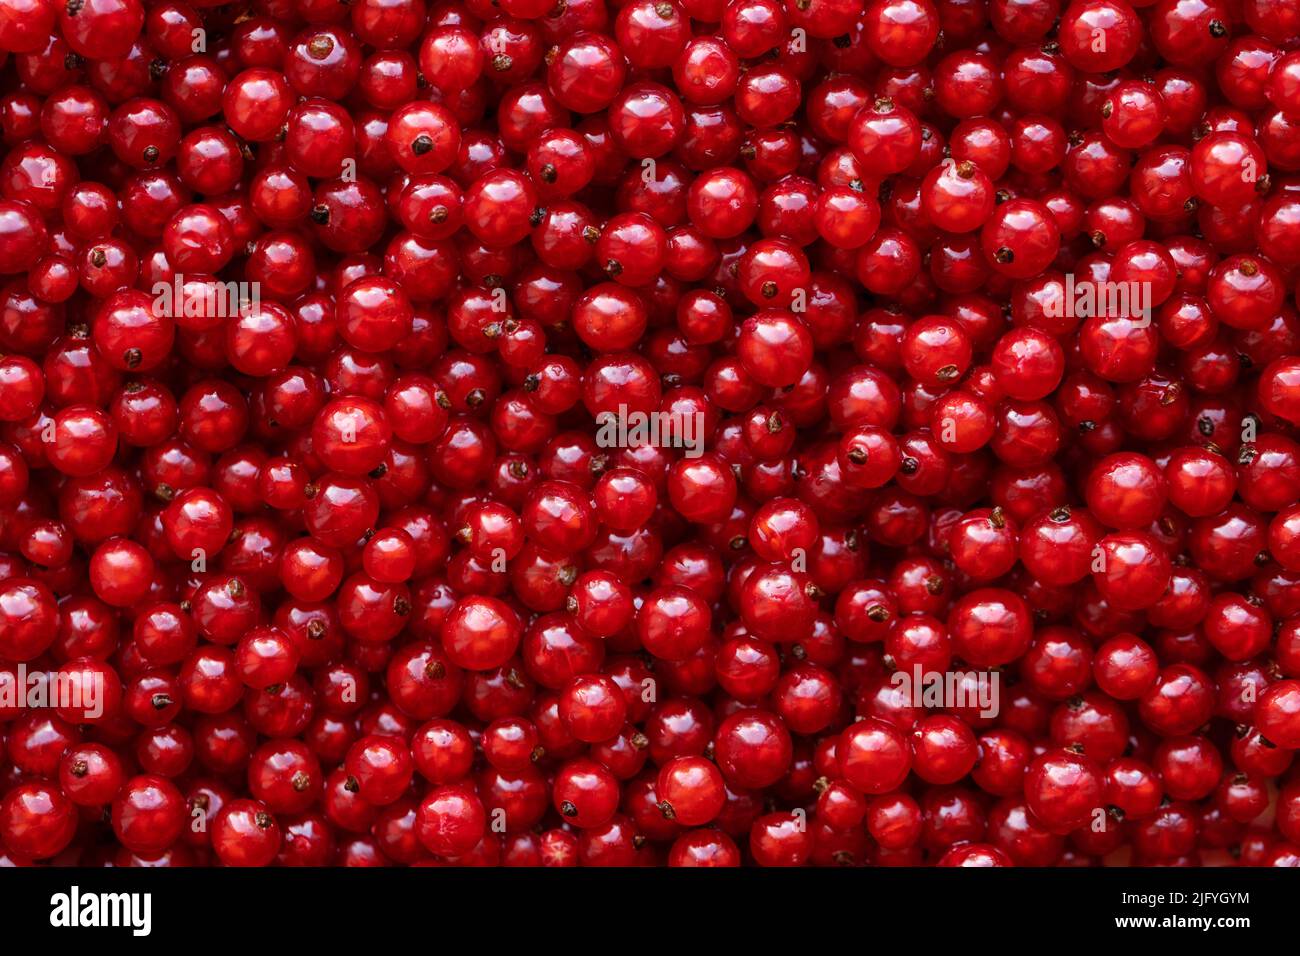 Red currant berries top view. Background with red berries. Stock Photo